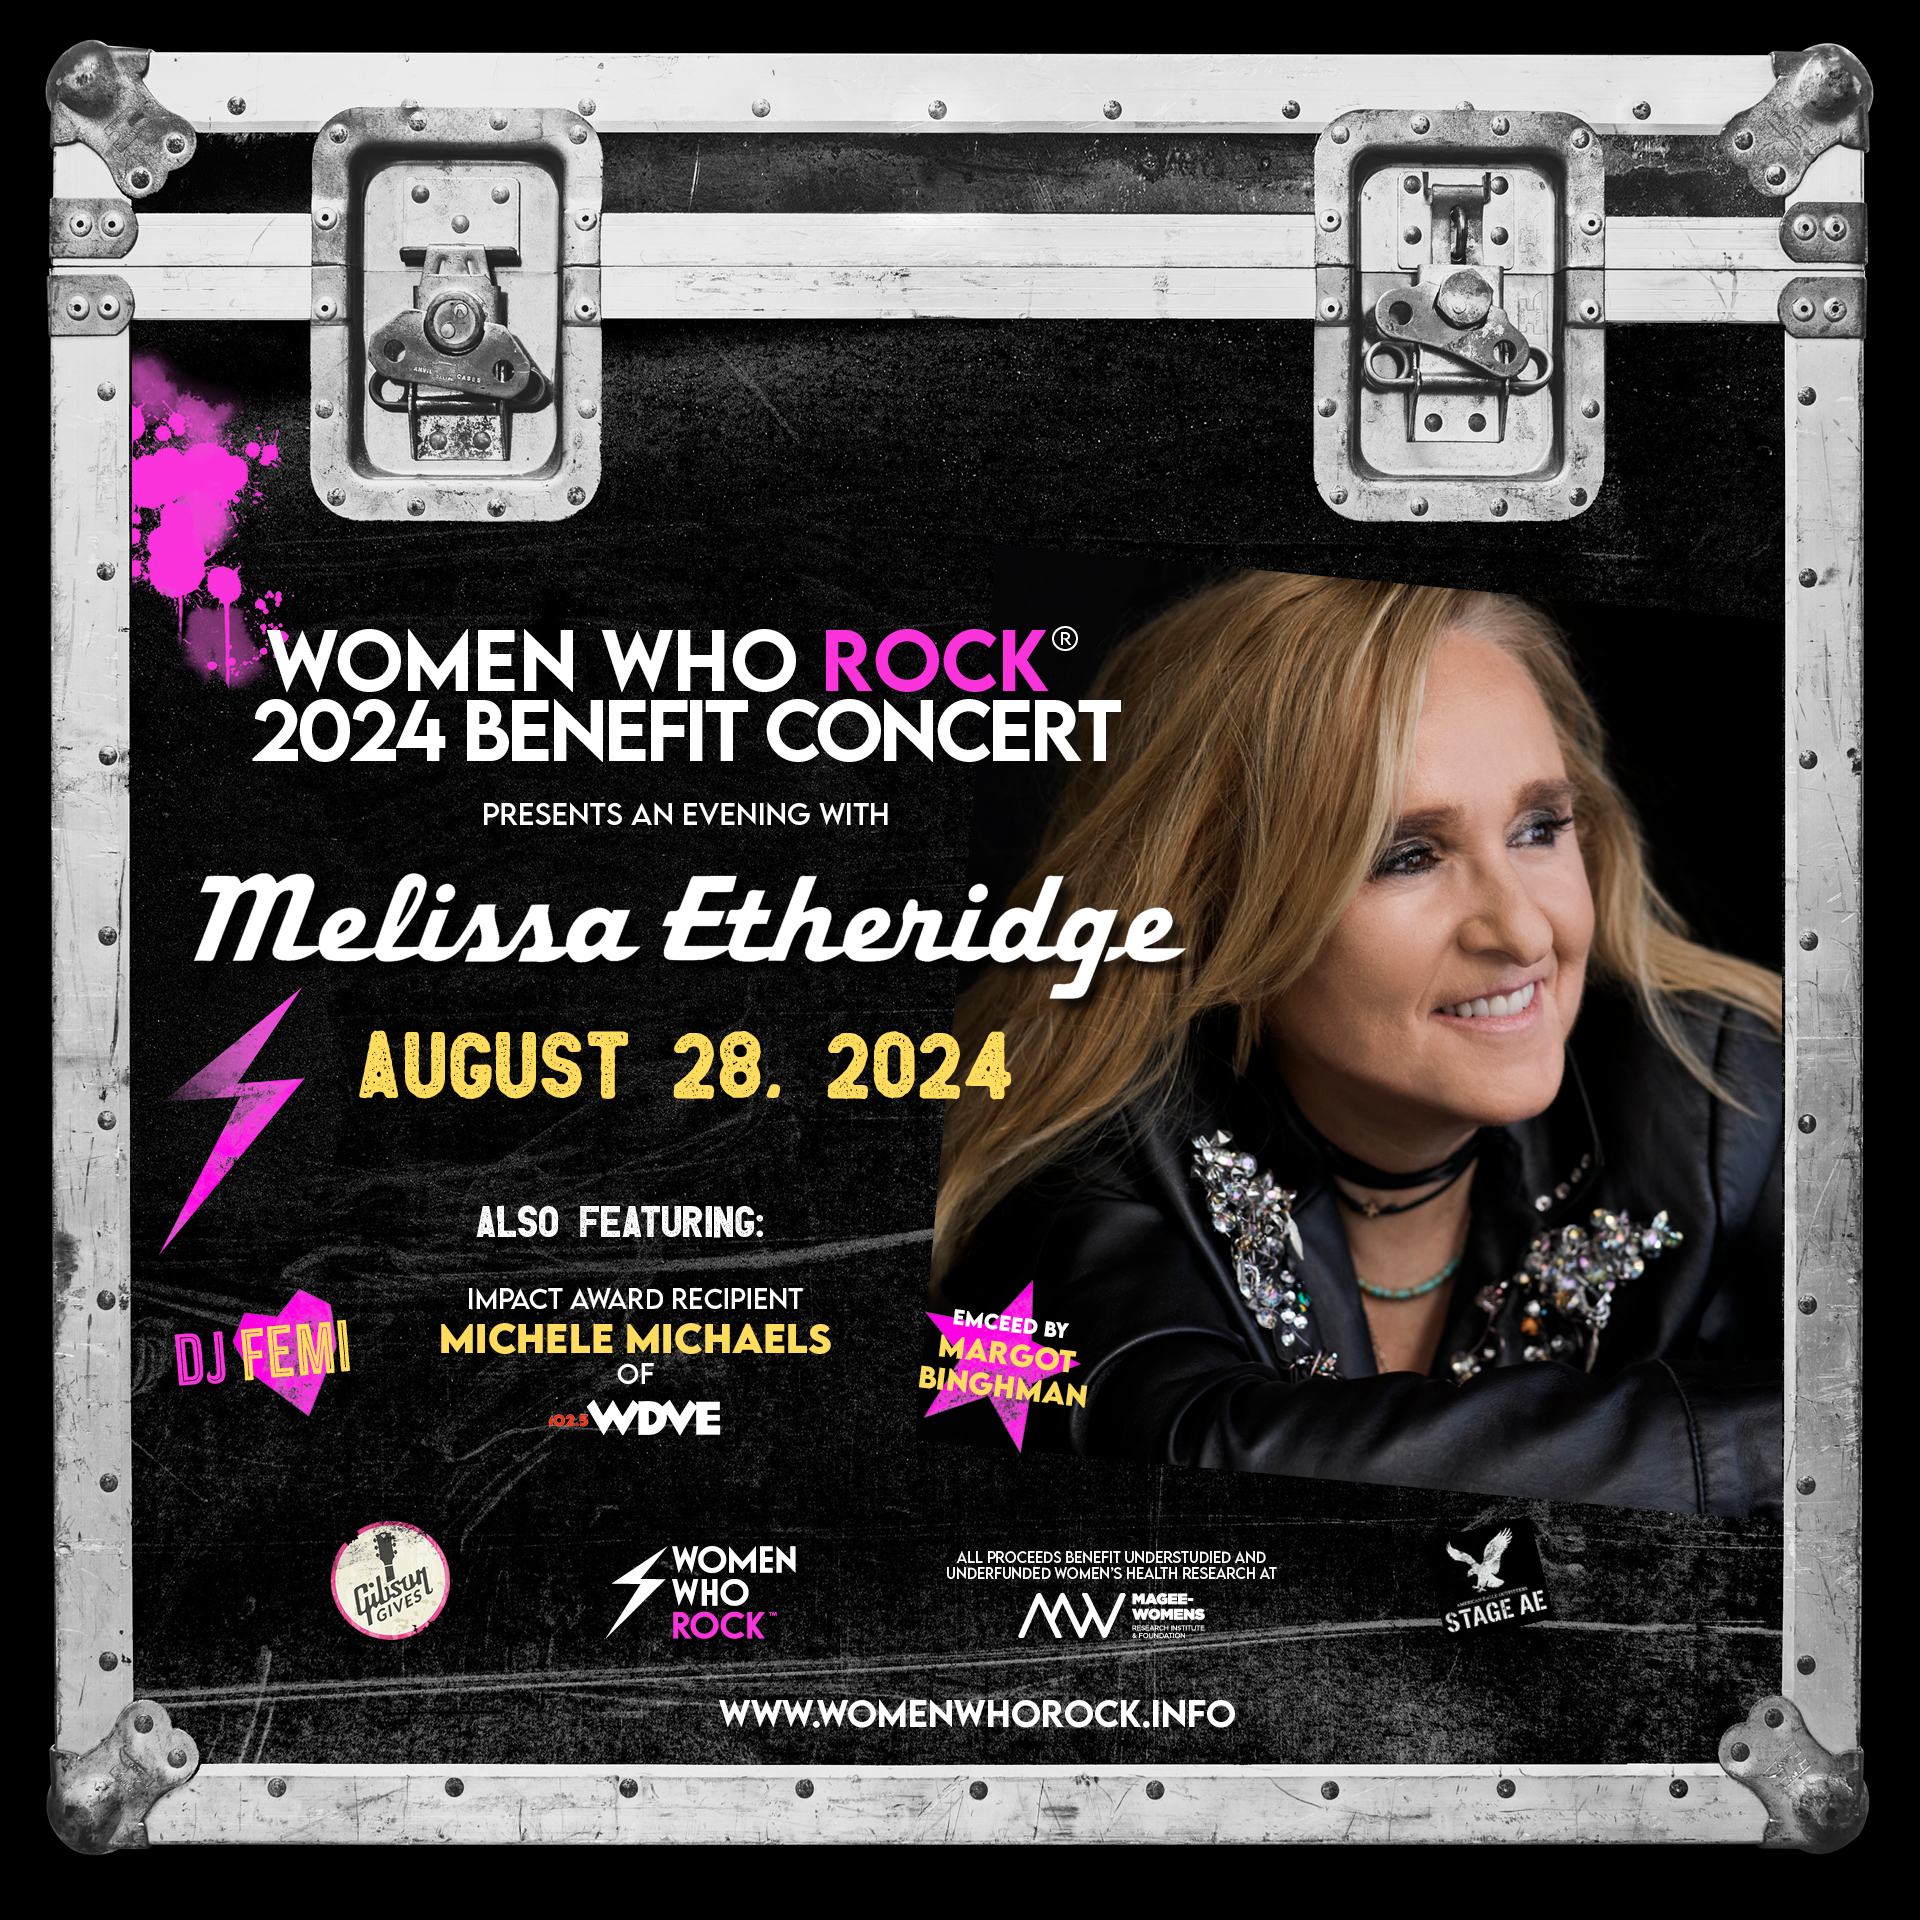 The graphic for the Women Who Rock 2024 Benefit Concert. It has a photo of Melissa Etheridge, her name, and the other featured women and sponsors mentioned in this article.